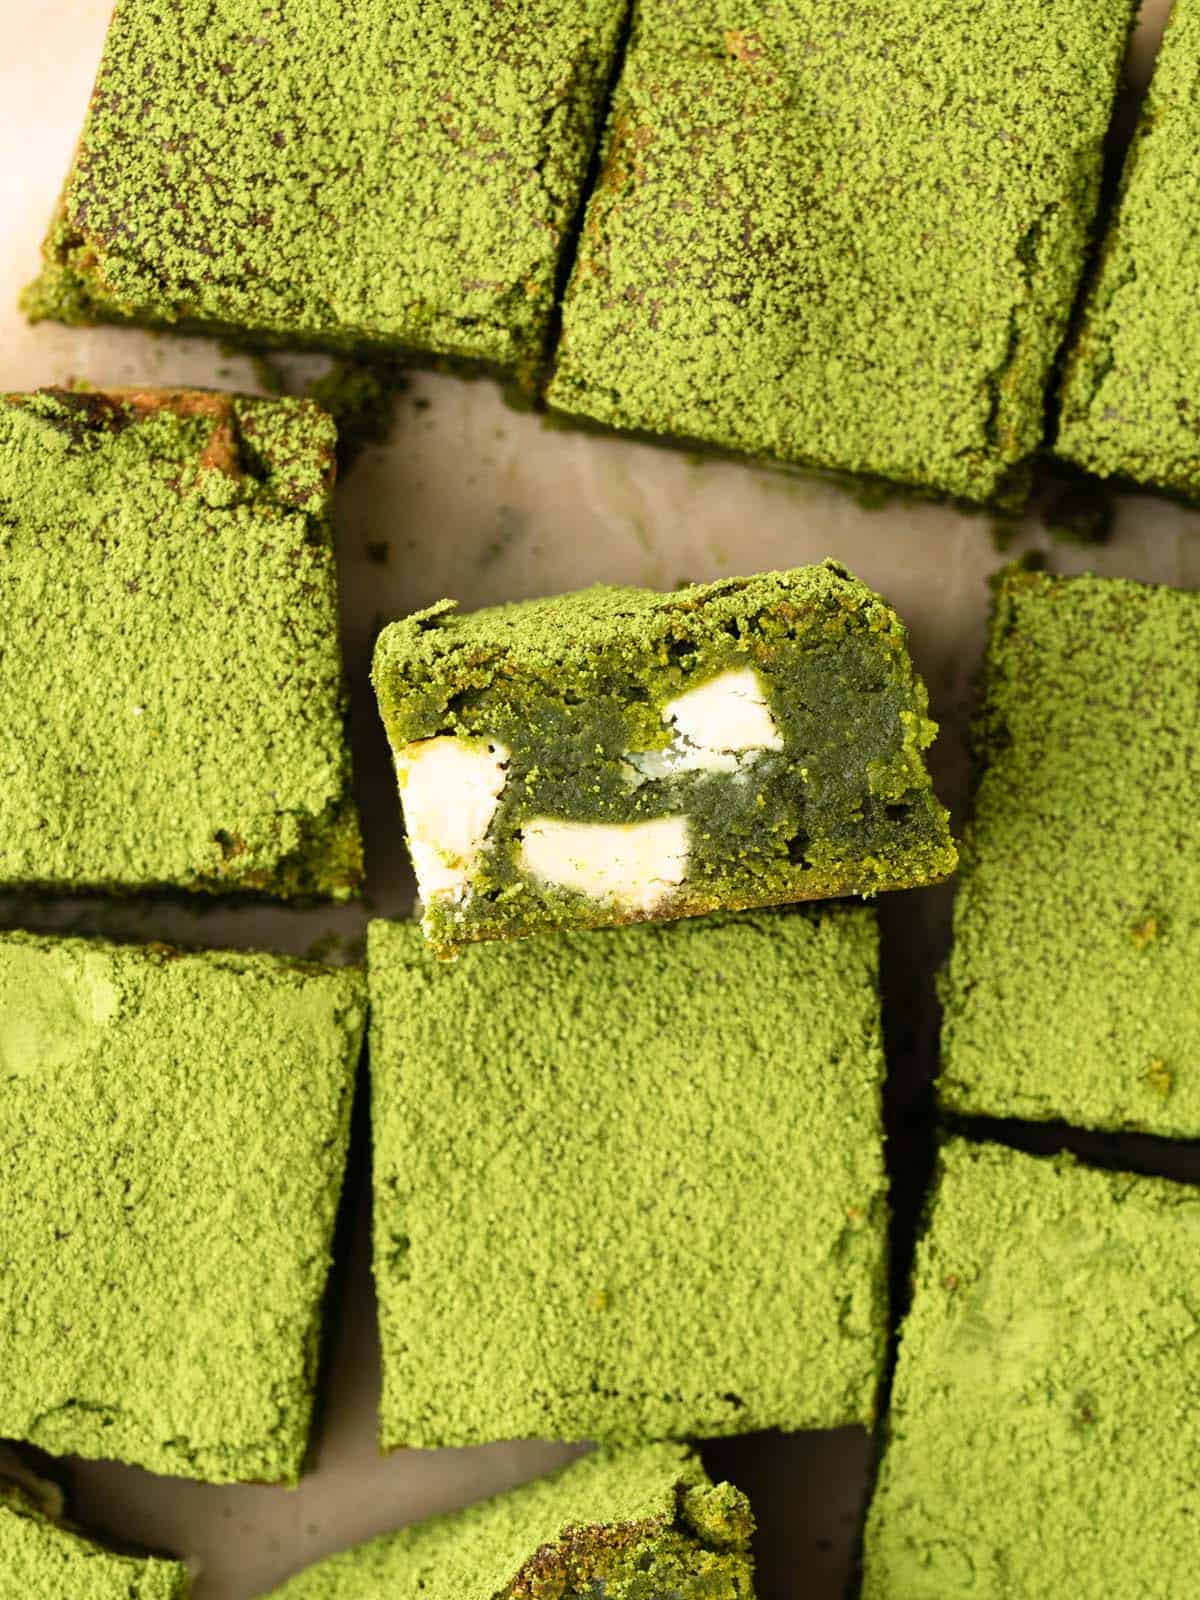 matcha brownies with white chocolate dusted with green tea powder